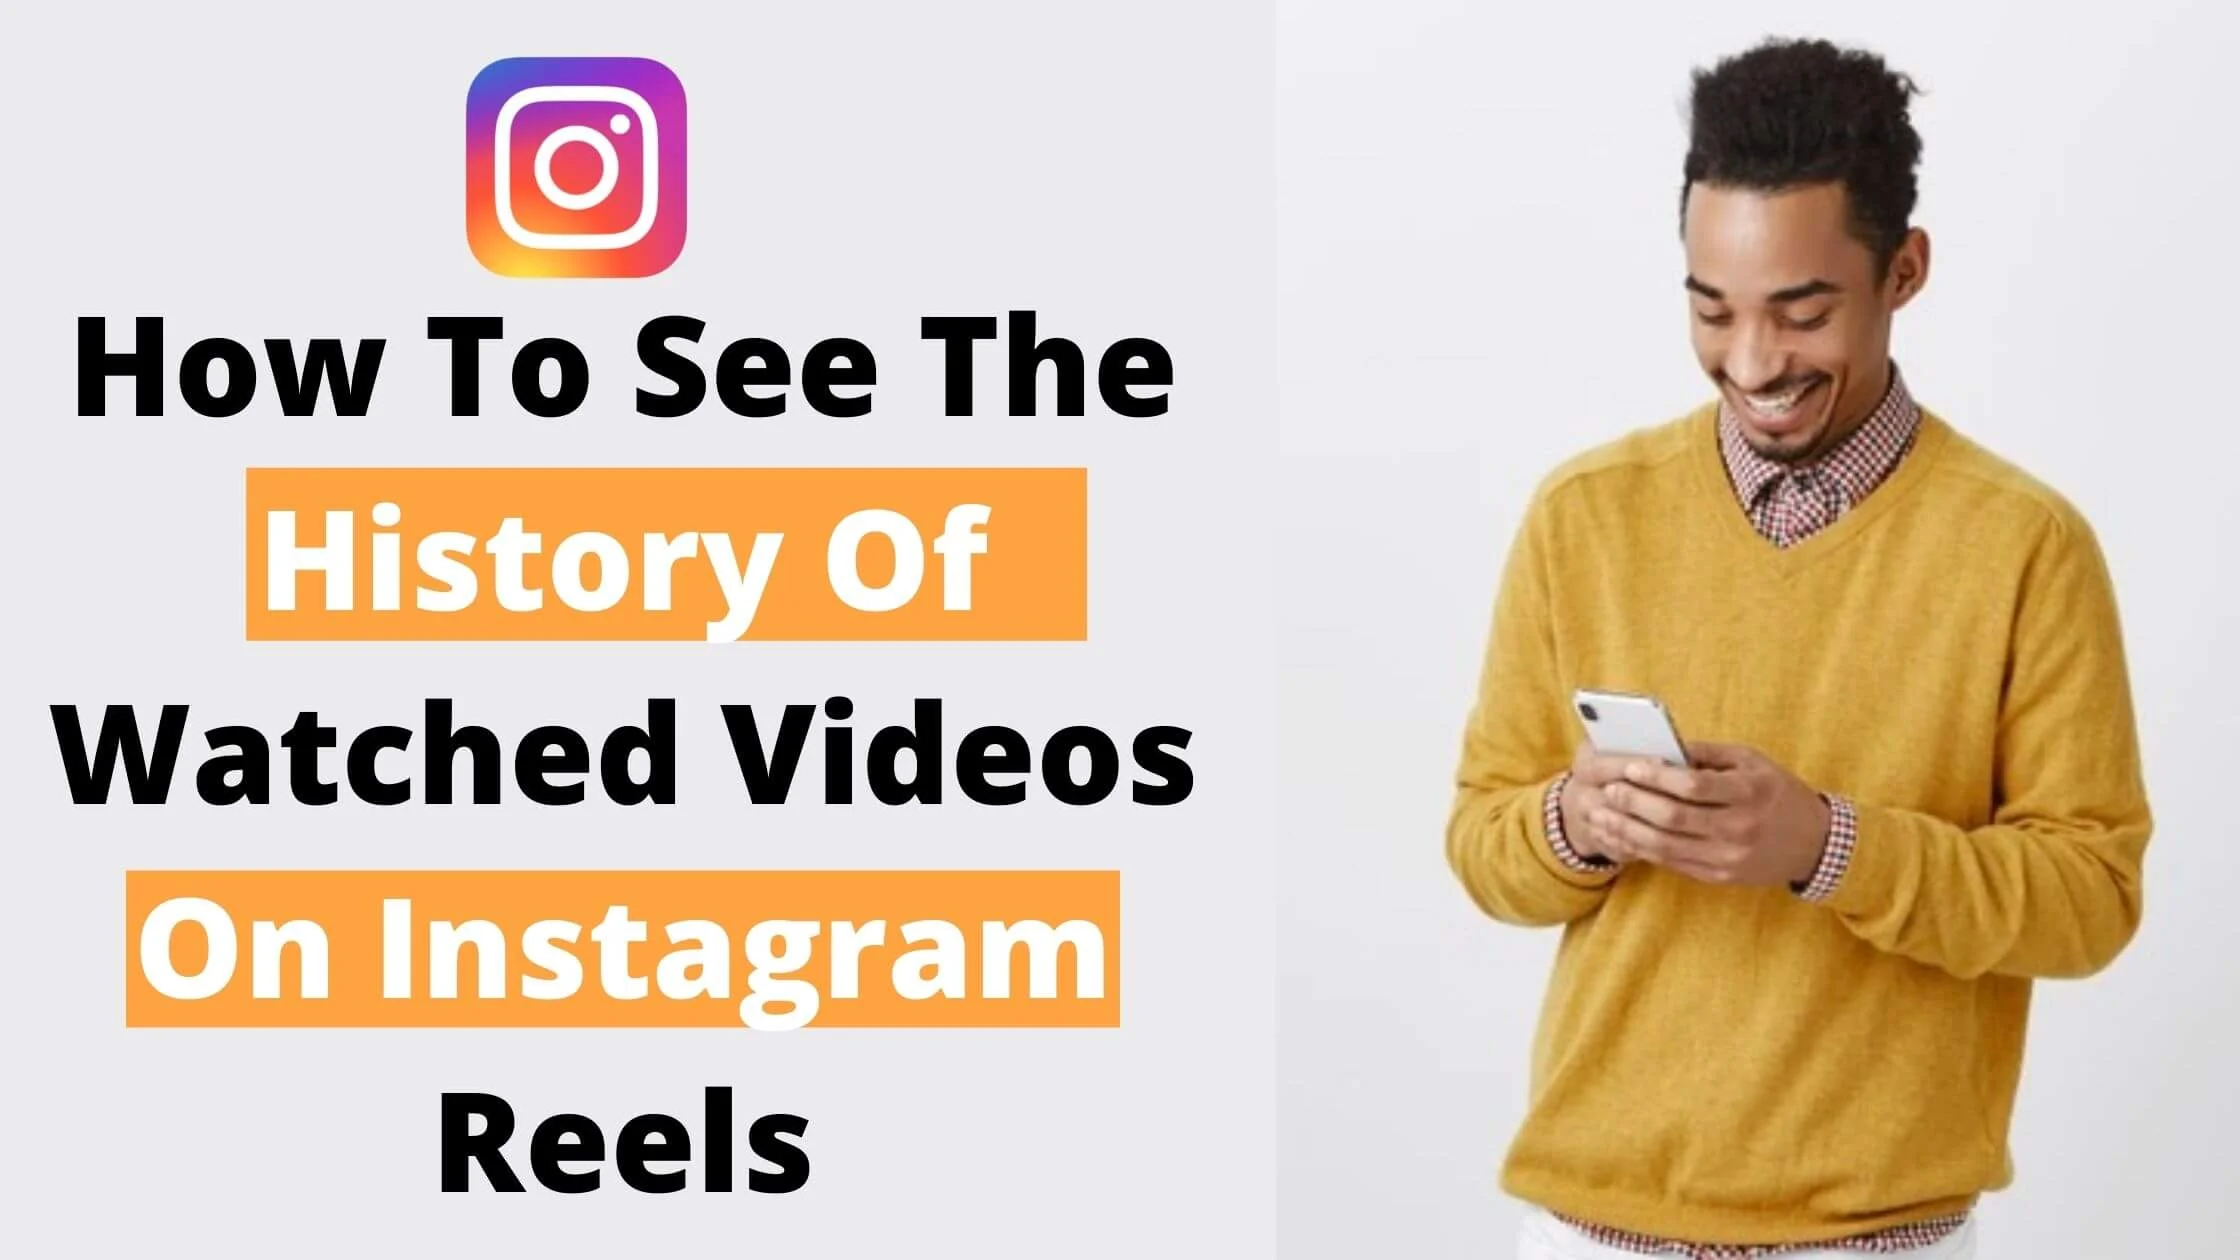 How To See The History Of Watched Videos On Instagram Reels